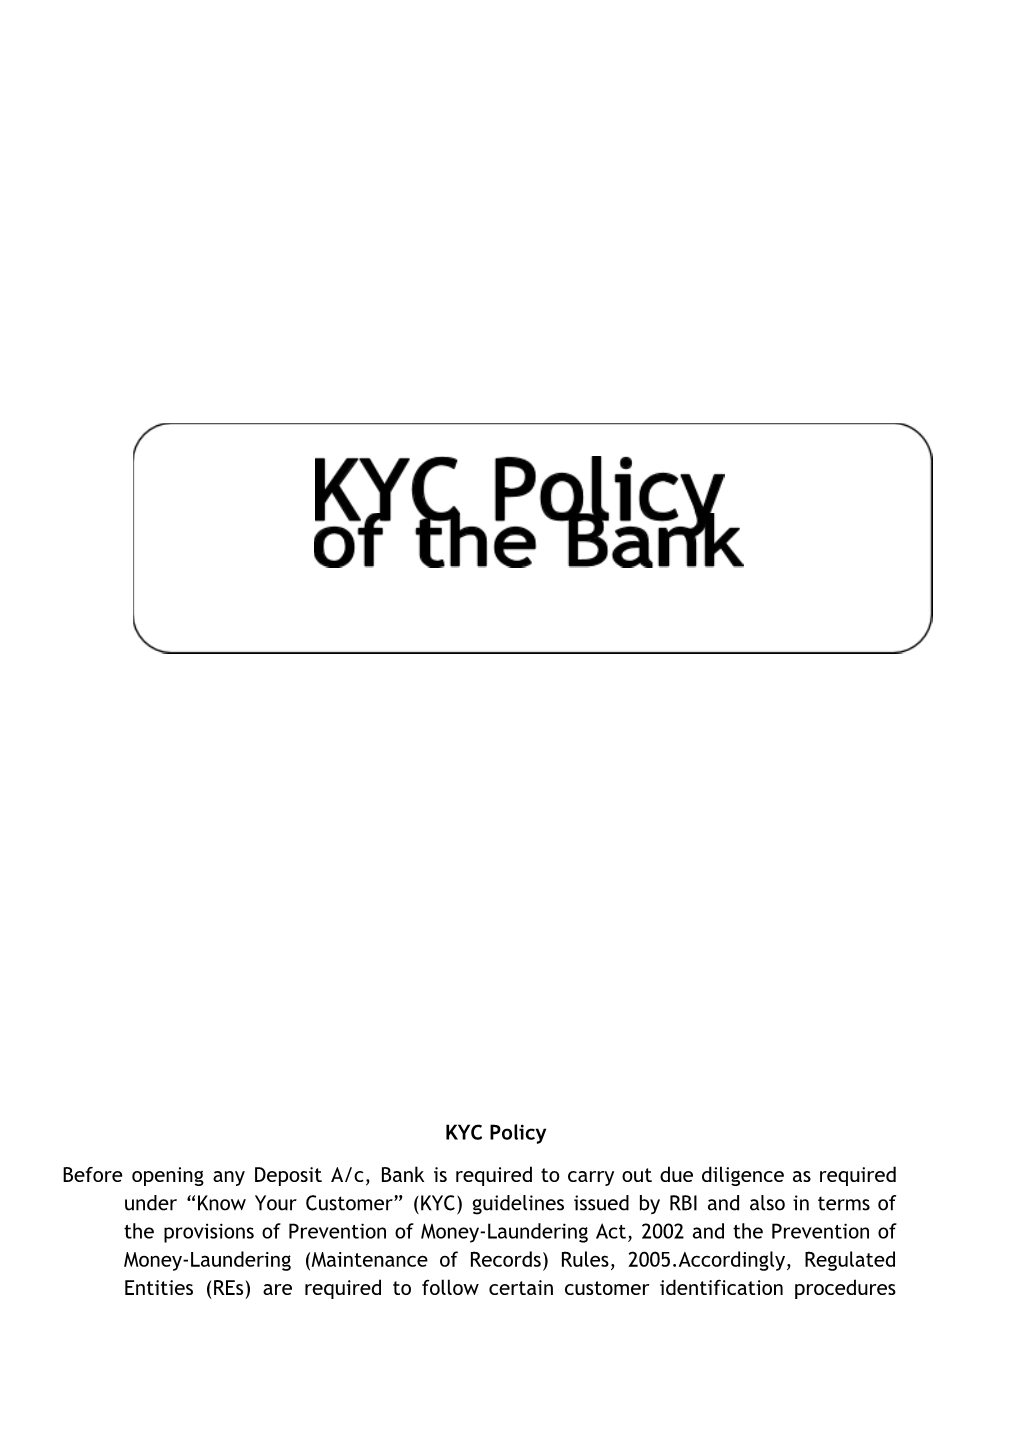 KYC Policy Before Opening Any Deposit A